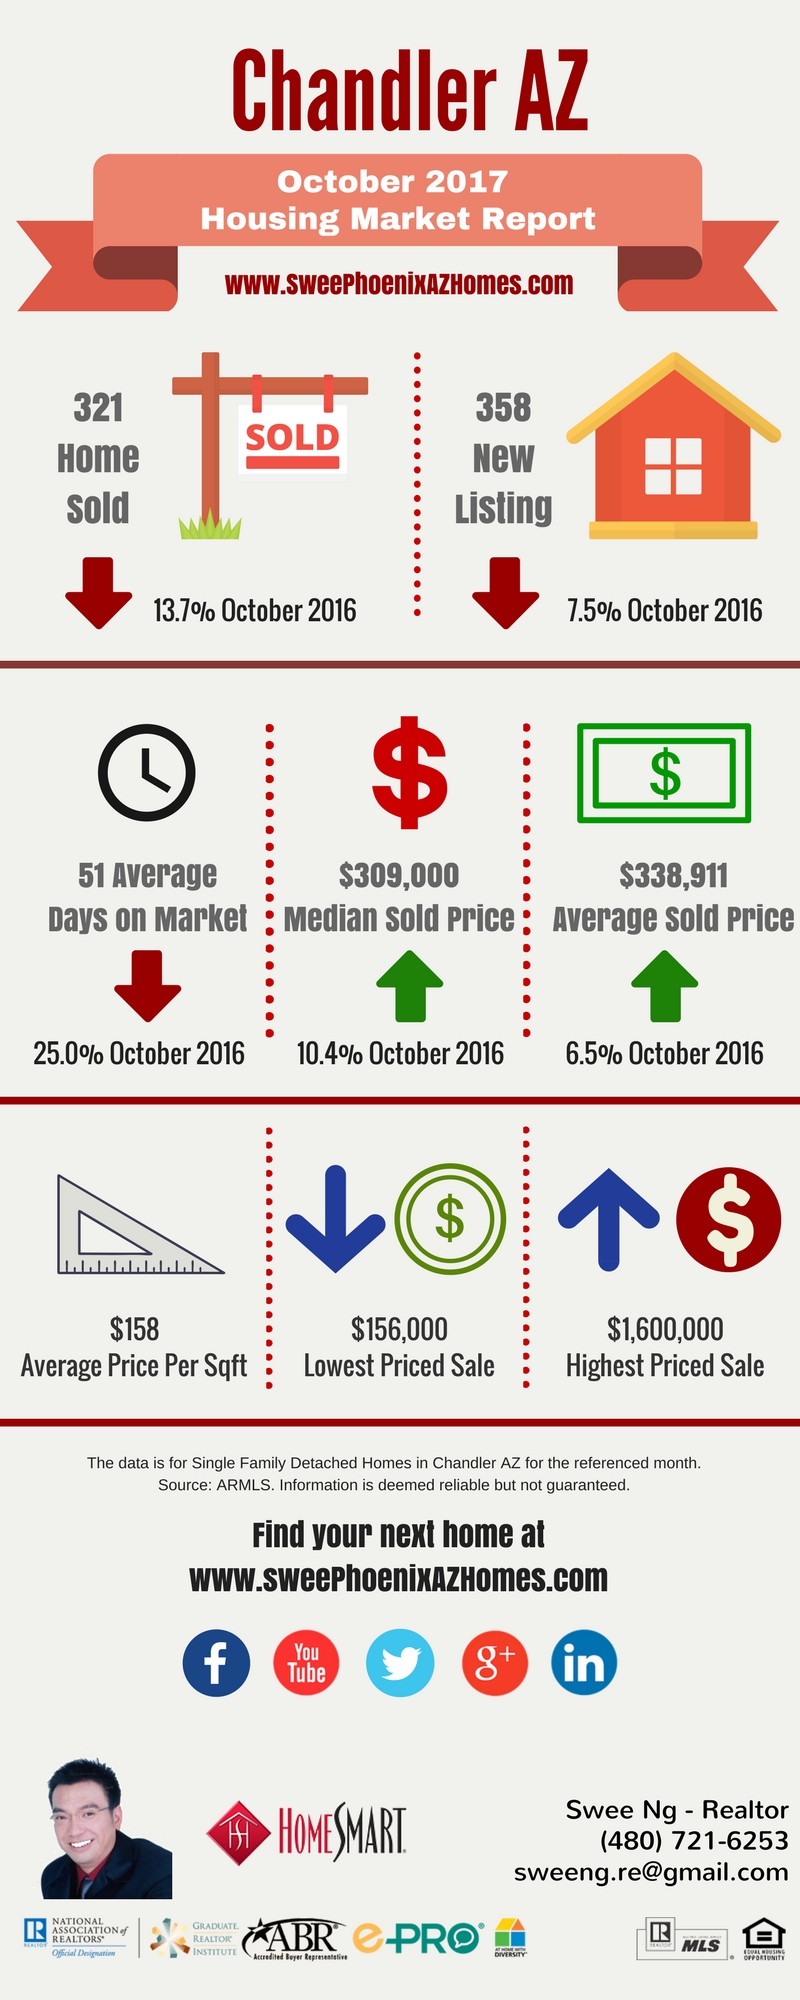 Chandler AZ Housing Market Update October 2017 by Swee Ng, House Value and Real Estate Listings